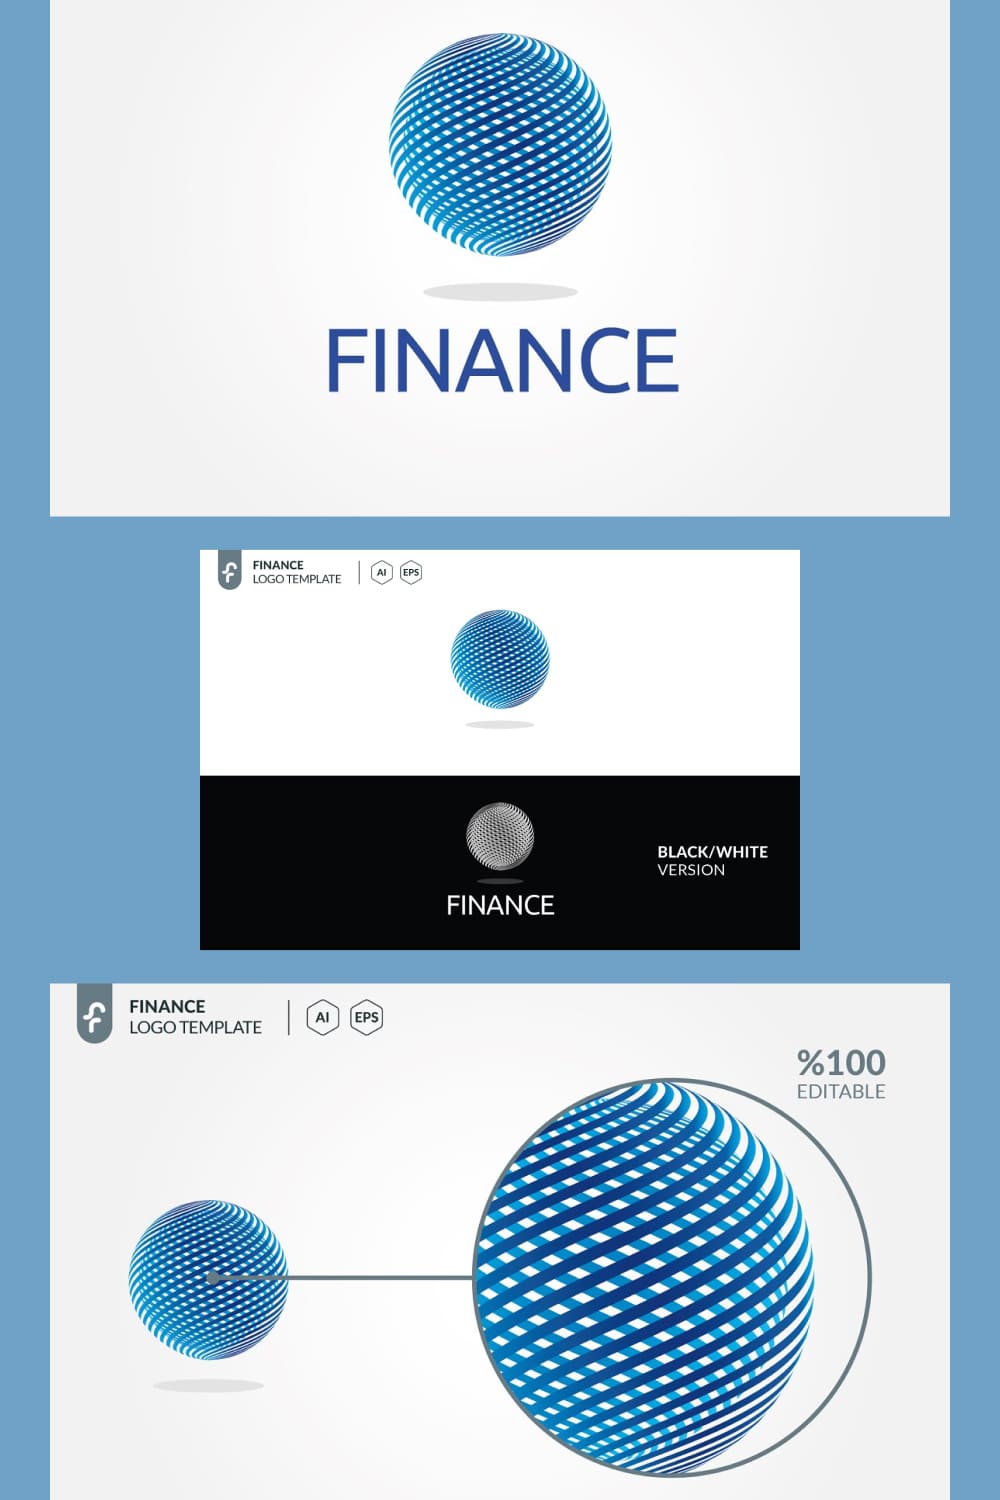 Blue round is a new shape for finance logo.